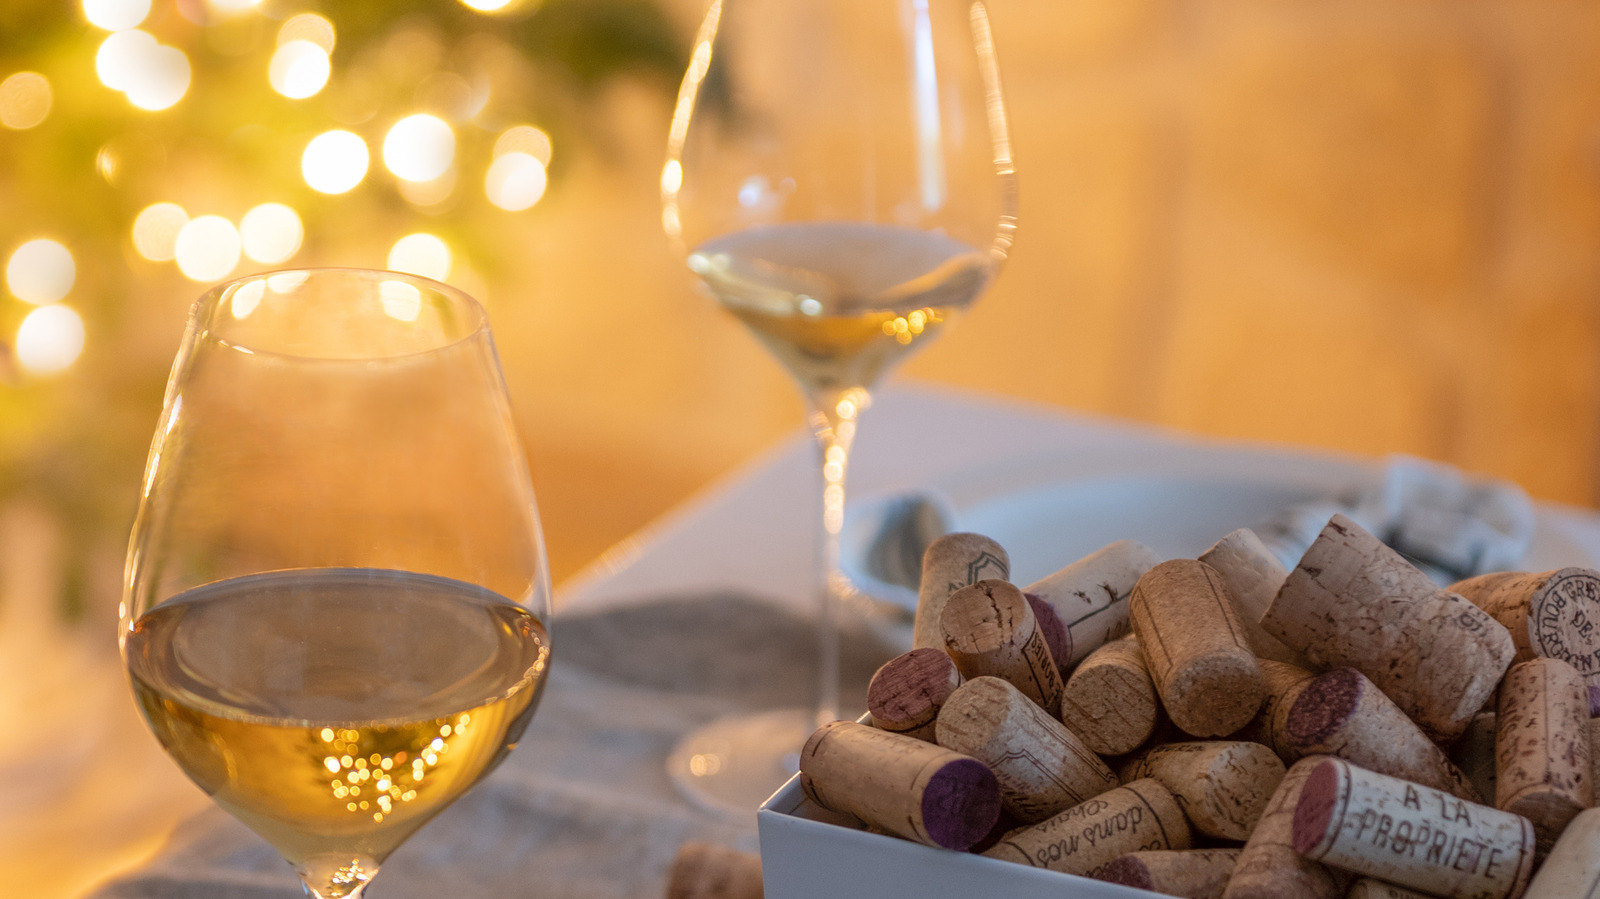 Should You Smell the Cork When Opening Wine?